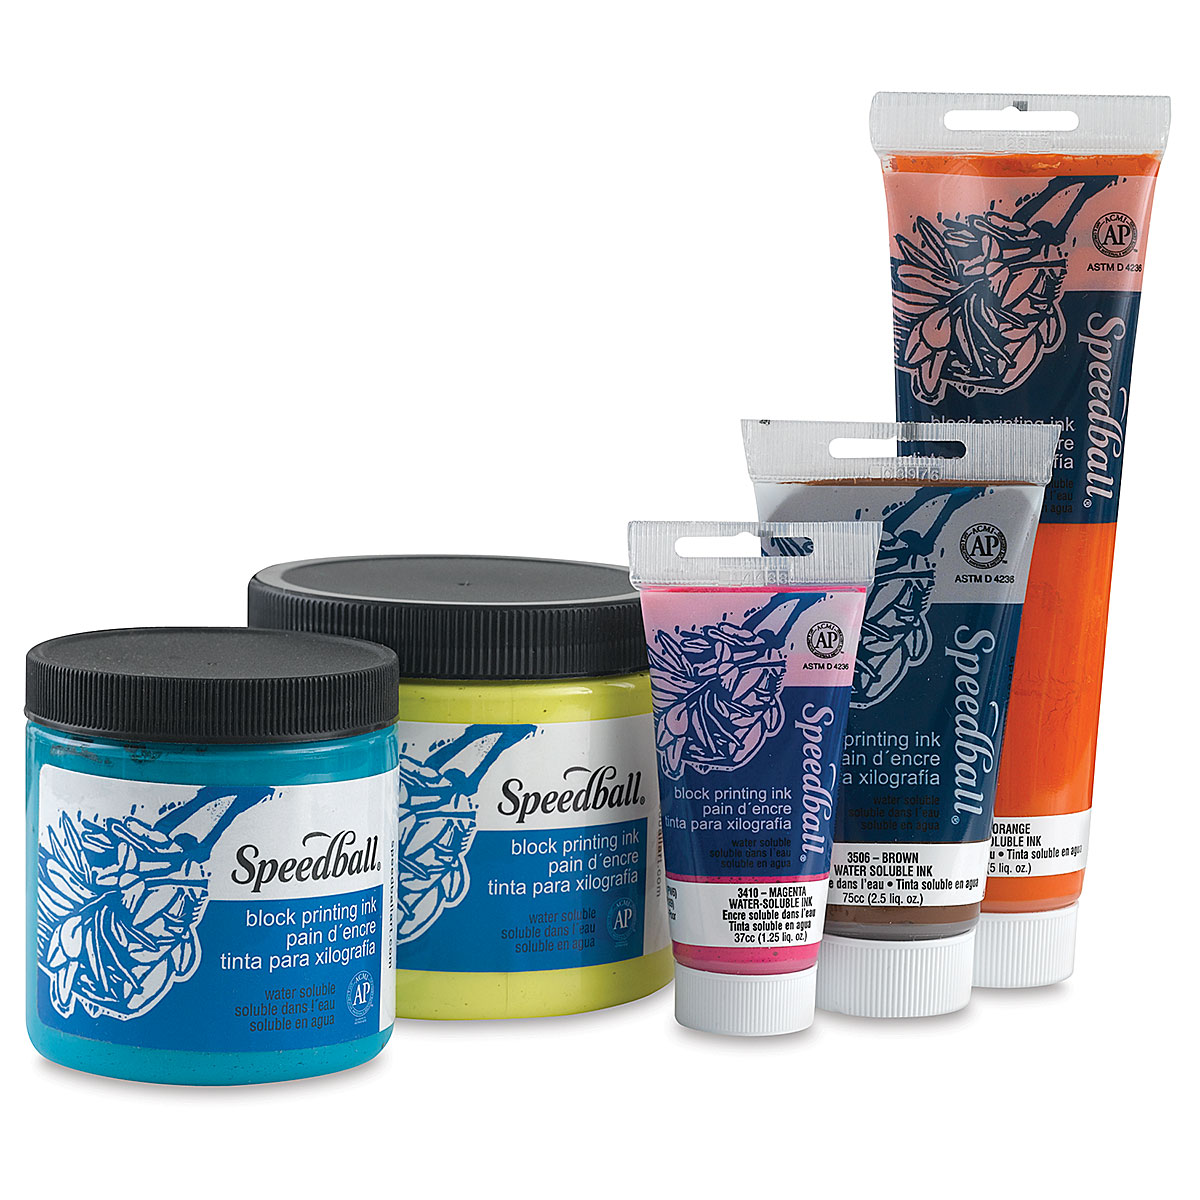 Which ink for printmaking?